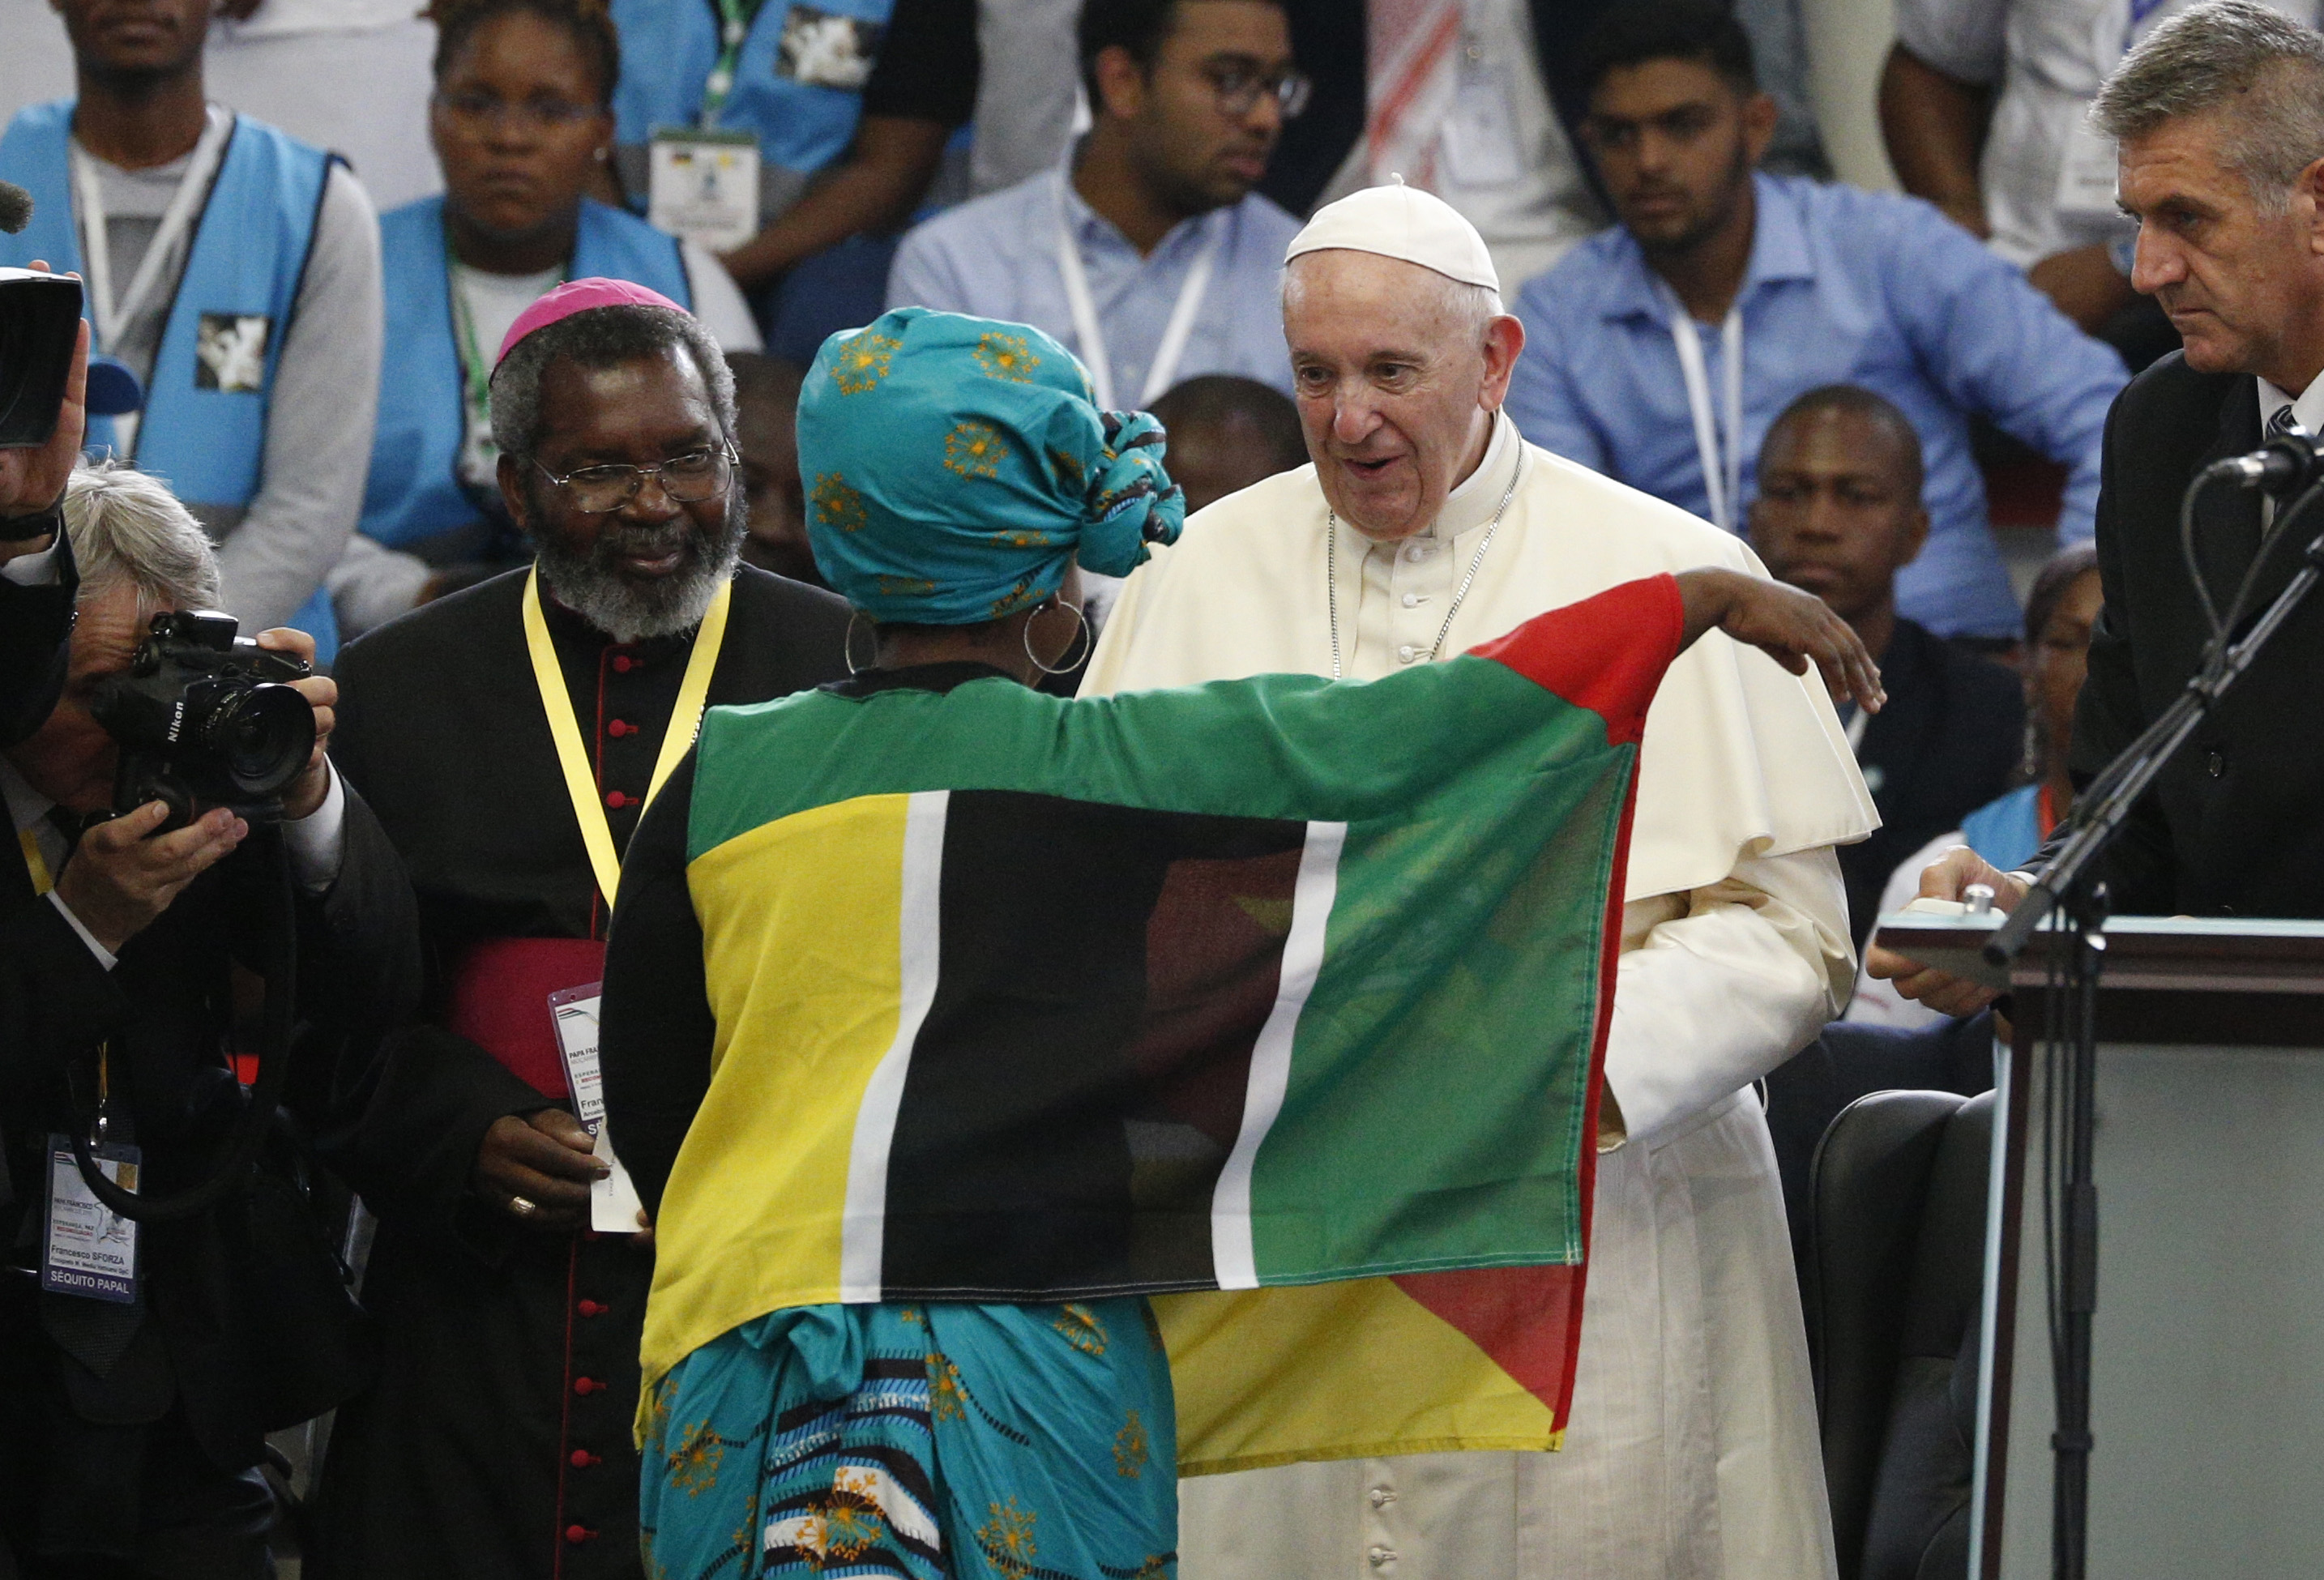 Pope in Mozambique talks peace, politics and young people's dreams